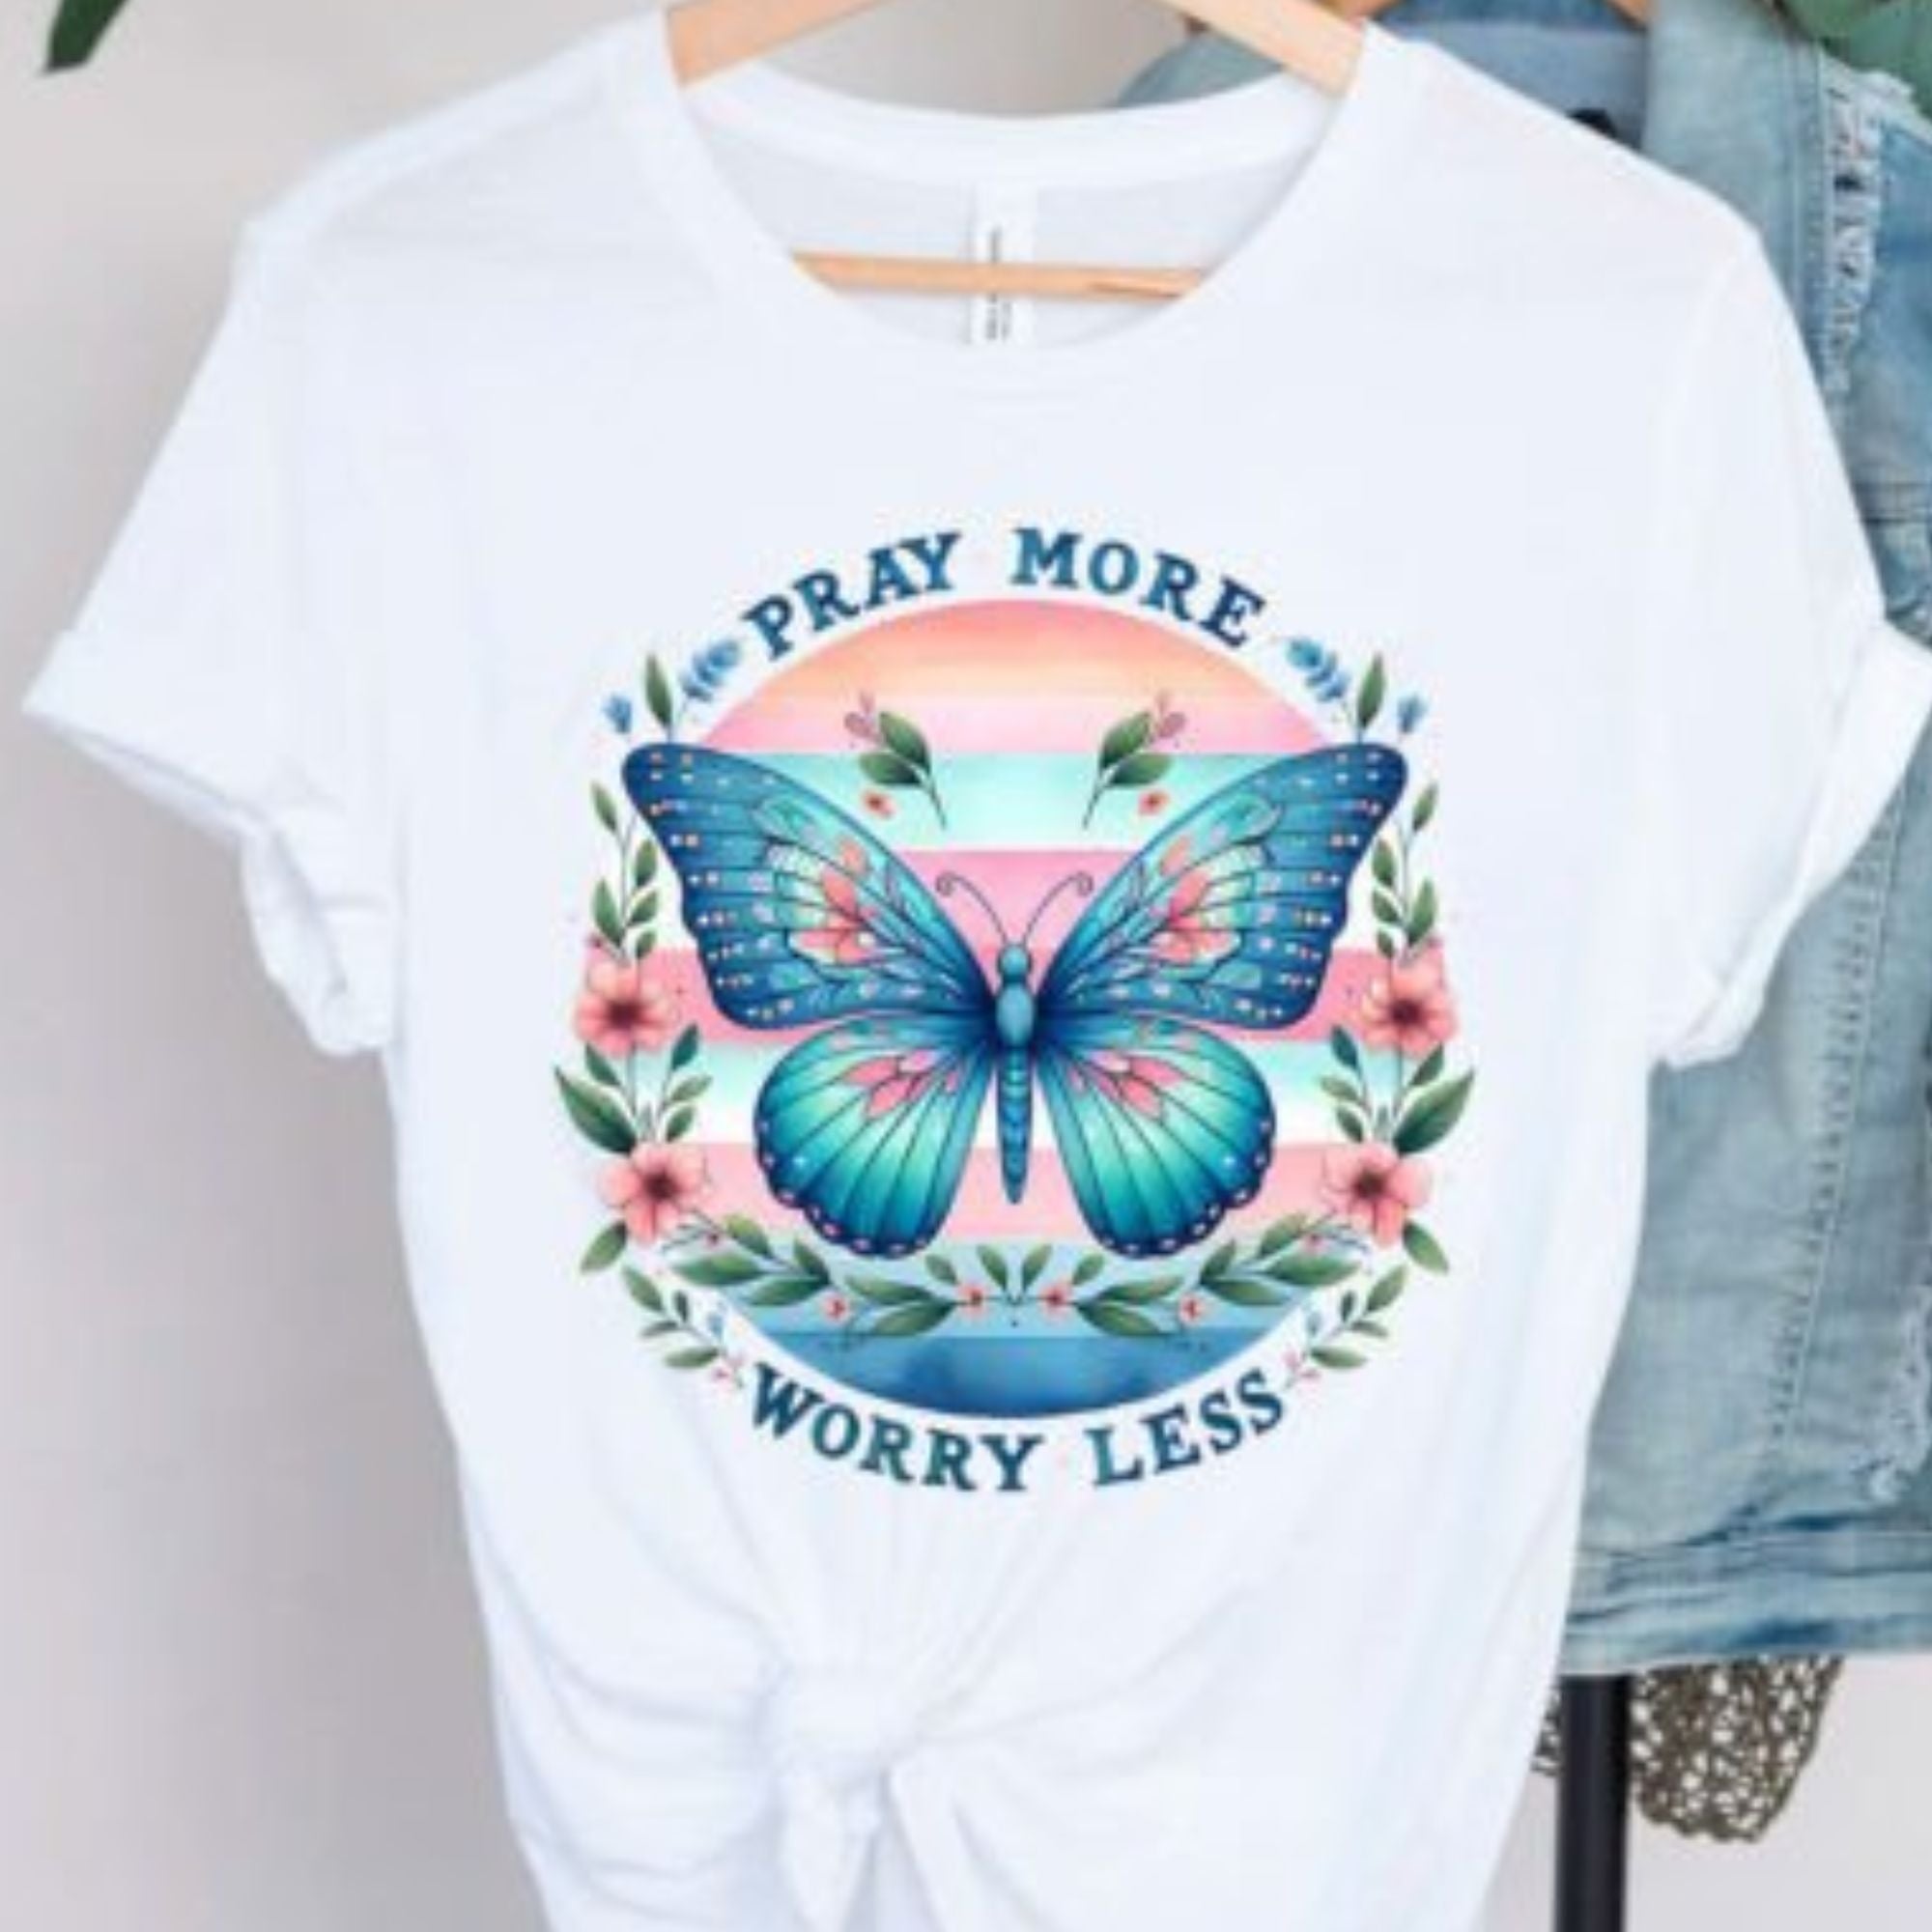 White cotton 'Pray more, worry less' graphic t-shirt with a beautiful butterfly and floral design, symbolizing tranquility and faith, available at Chivilla Bay.